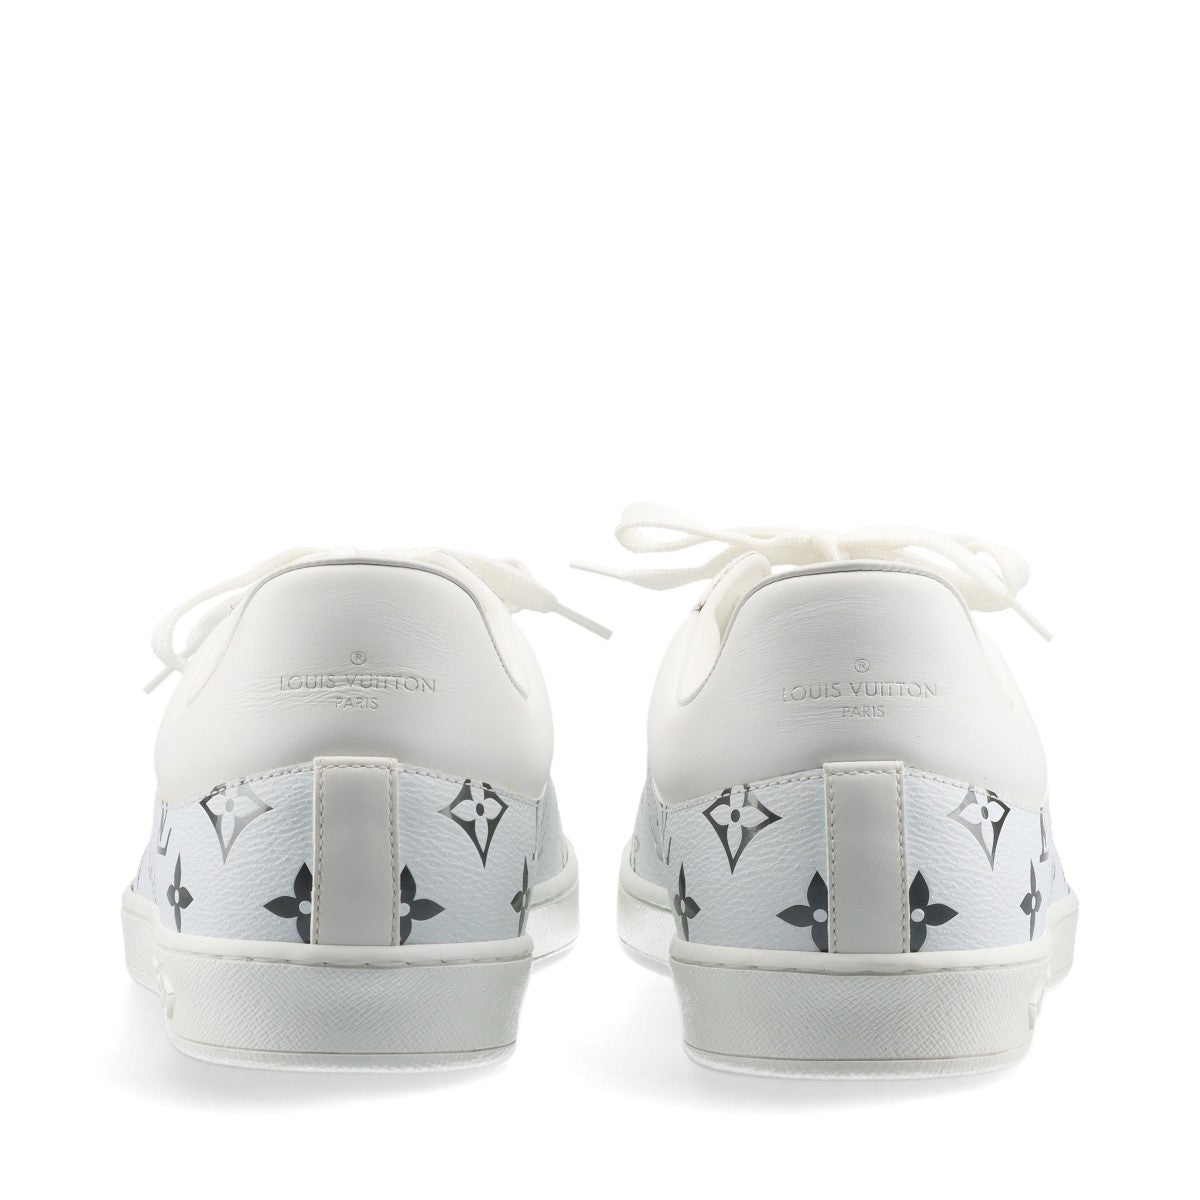 Louis Vuitton Luxembourg line 20 years Leather Sneakers 8 Men's Black × White MS1210 Monogram Aurora color